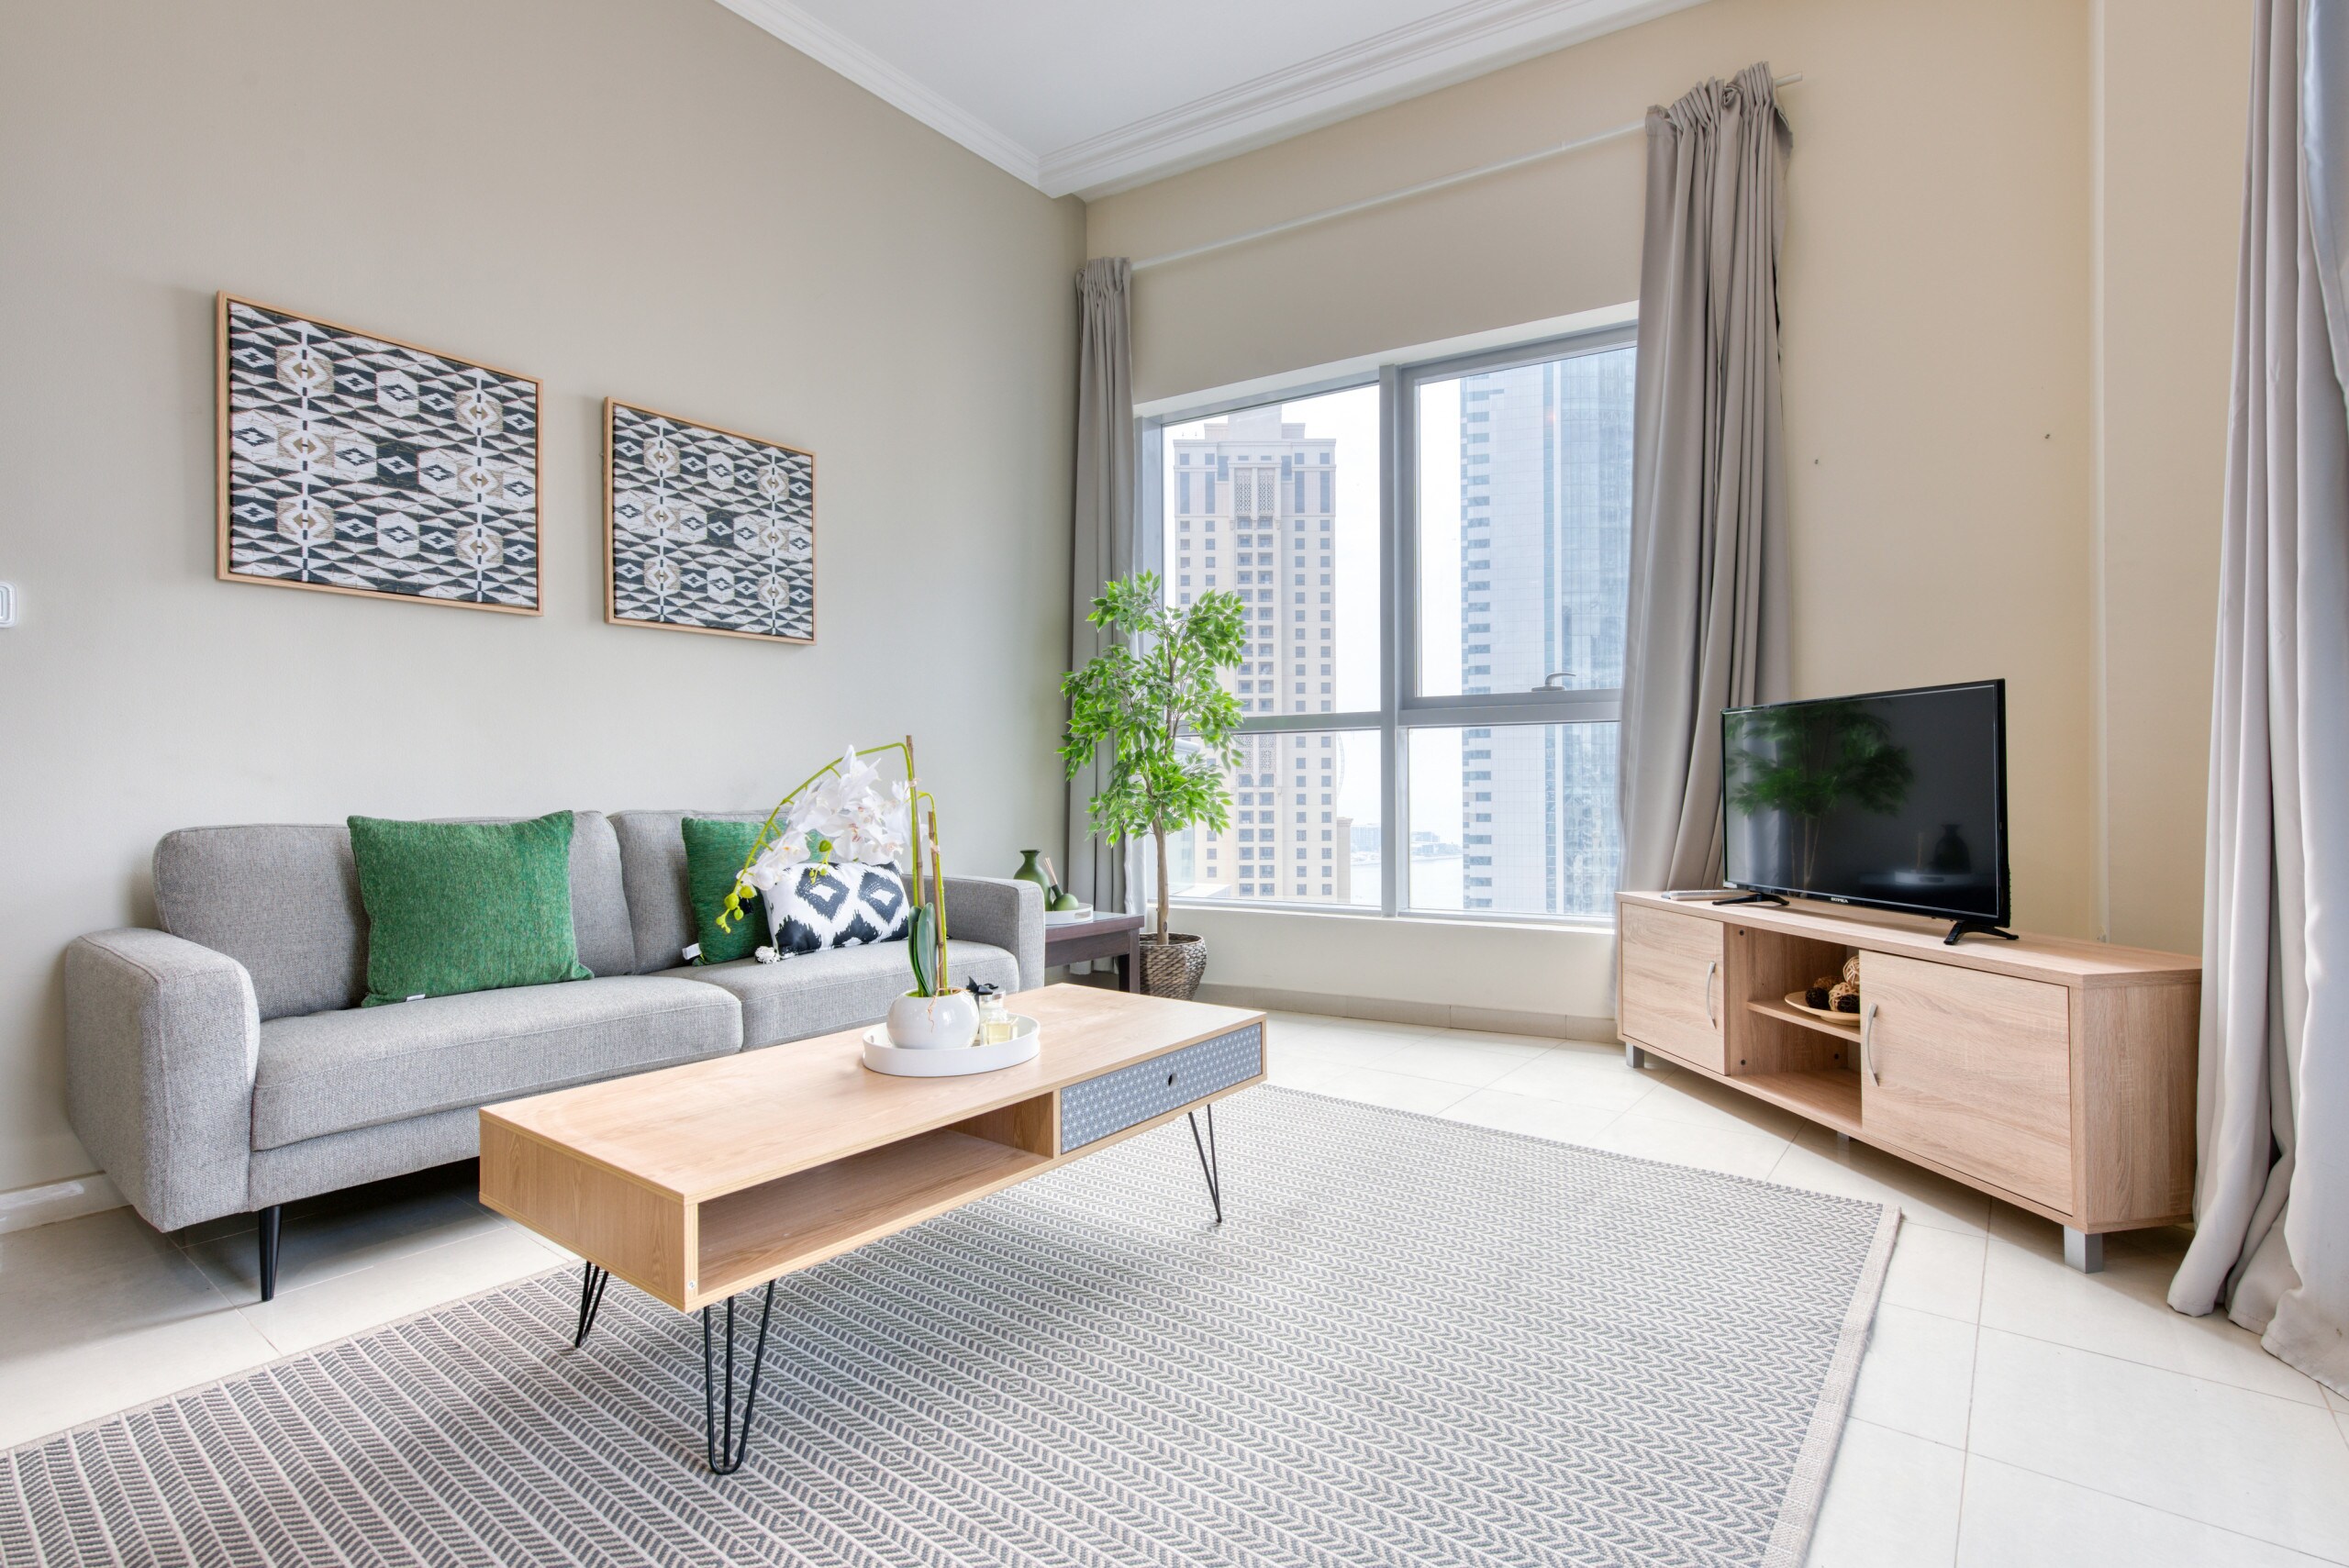 Property Image 1 - Cozy 1BR at Bay Central 1 Dubai Marina by Property Manager